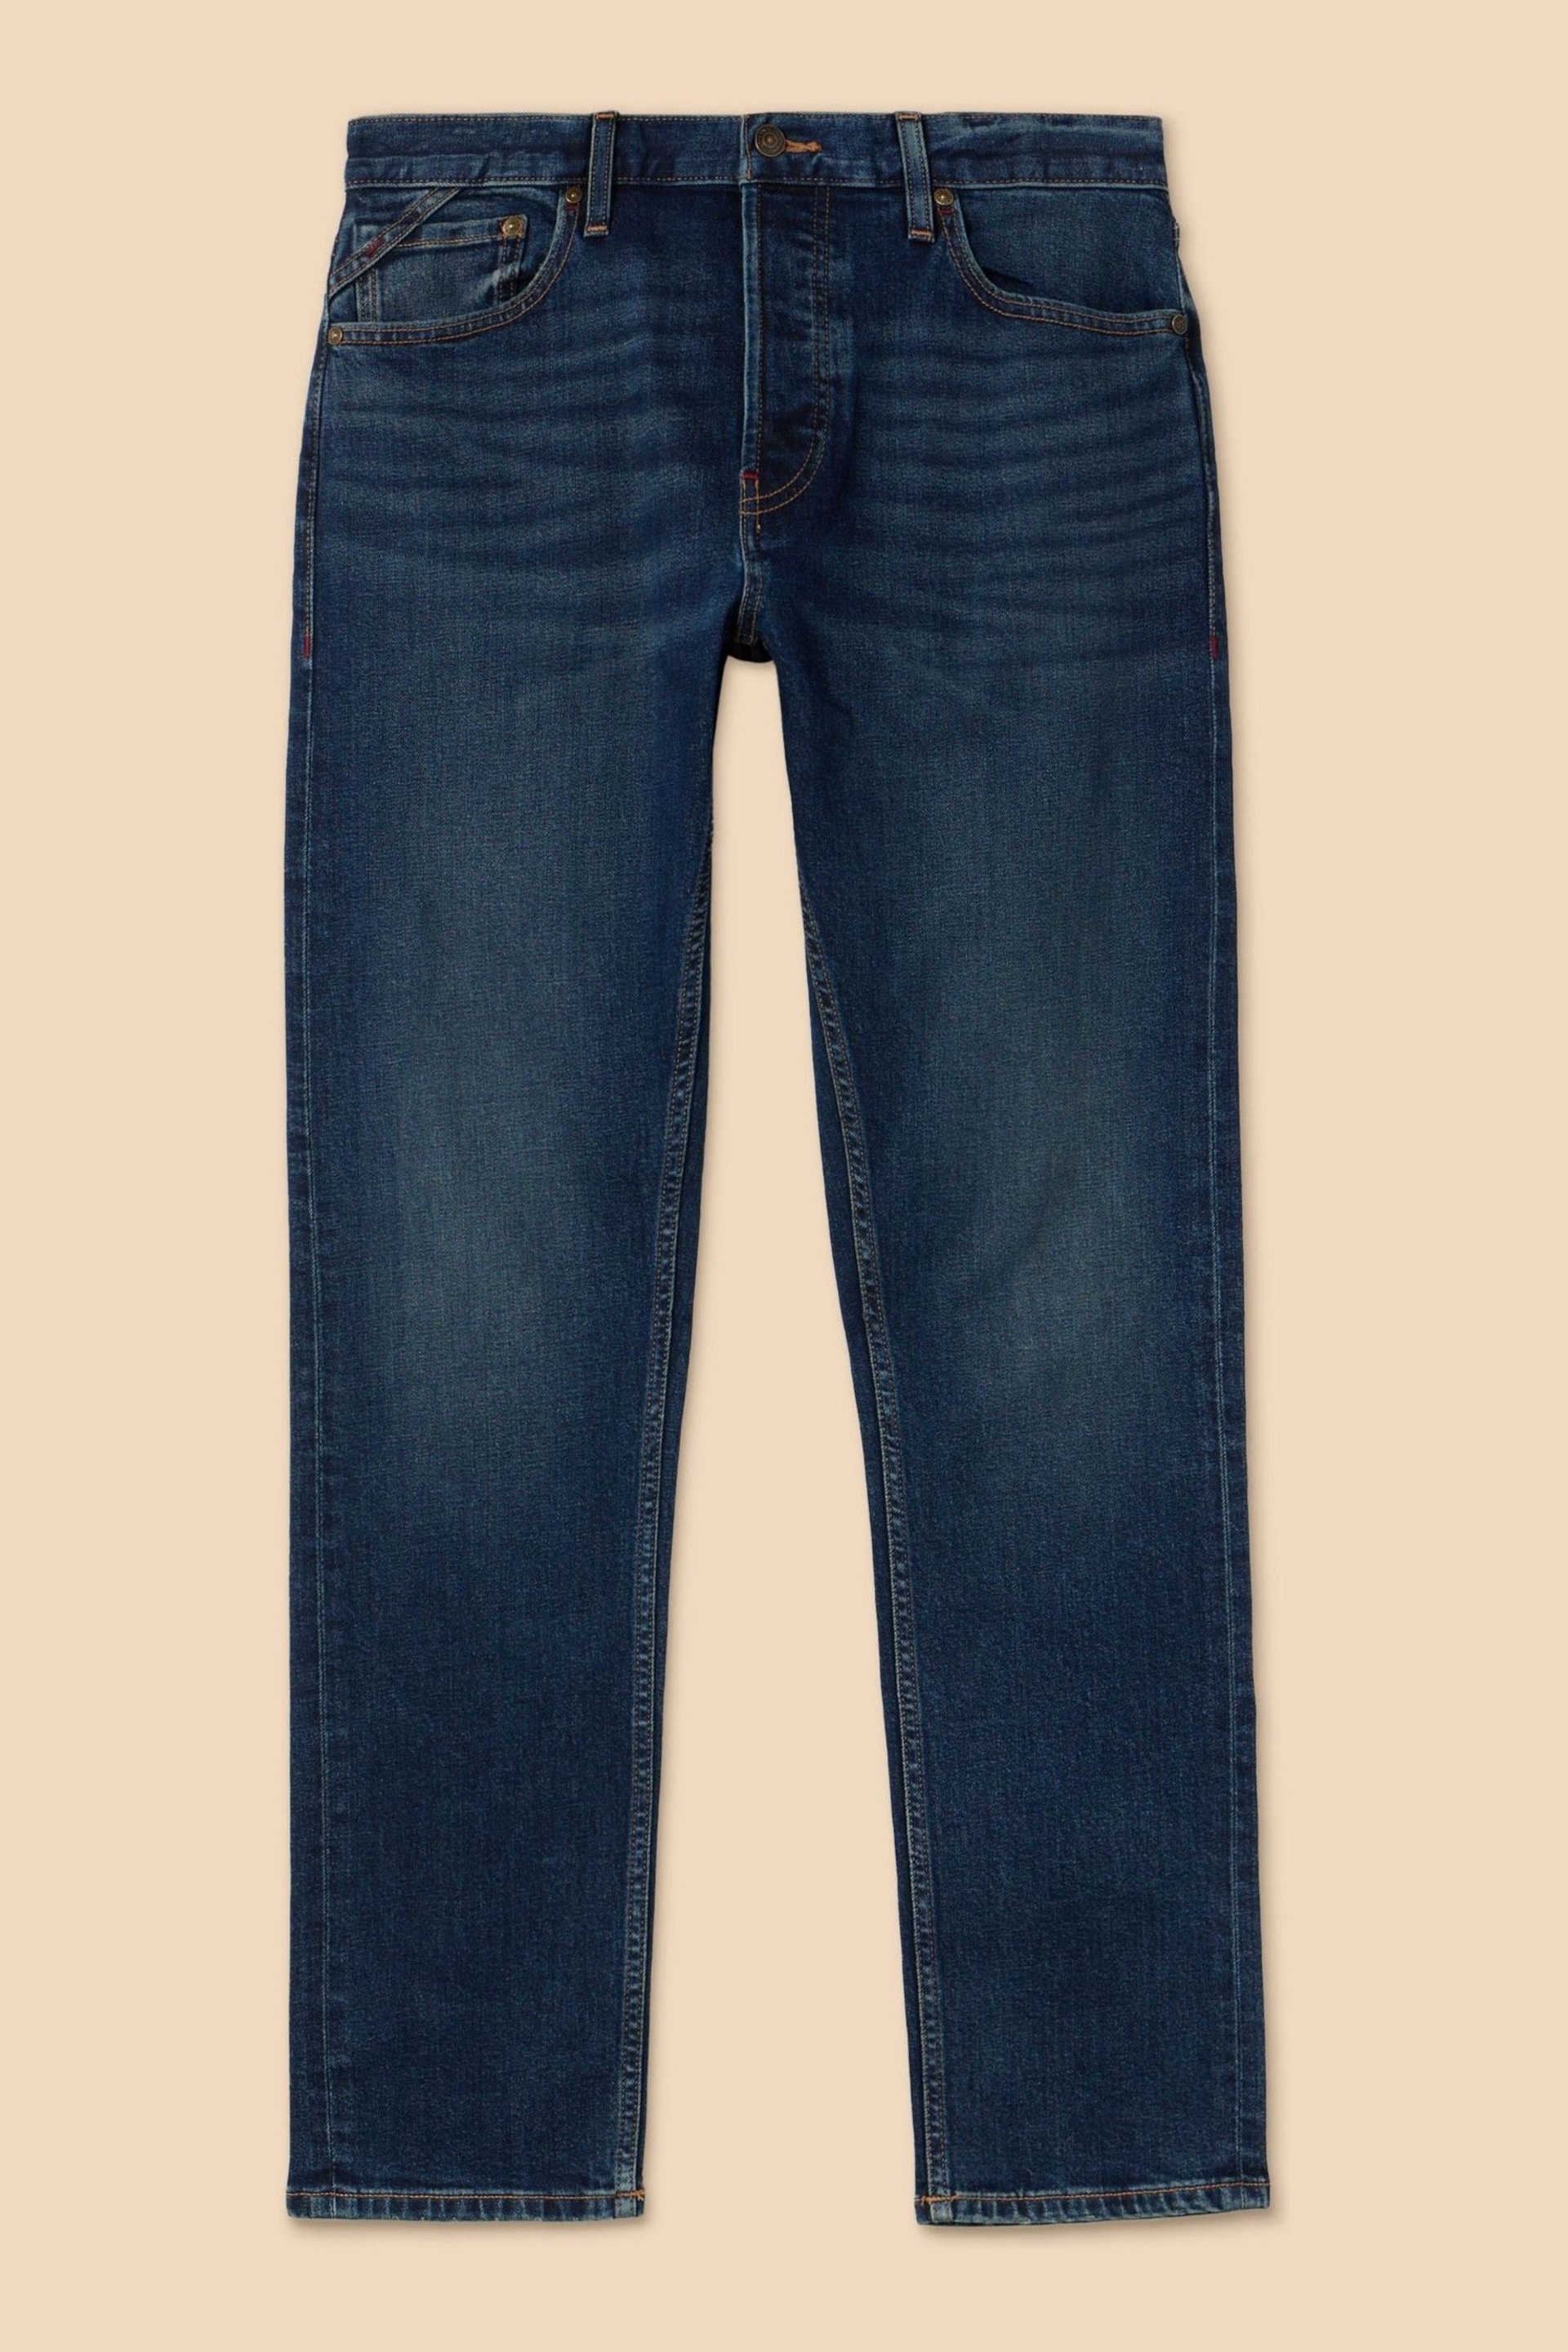 White Stuff Blue Eastwood Straight Jeans - Image 5 of 7